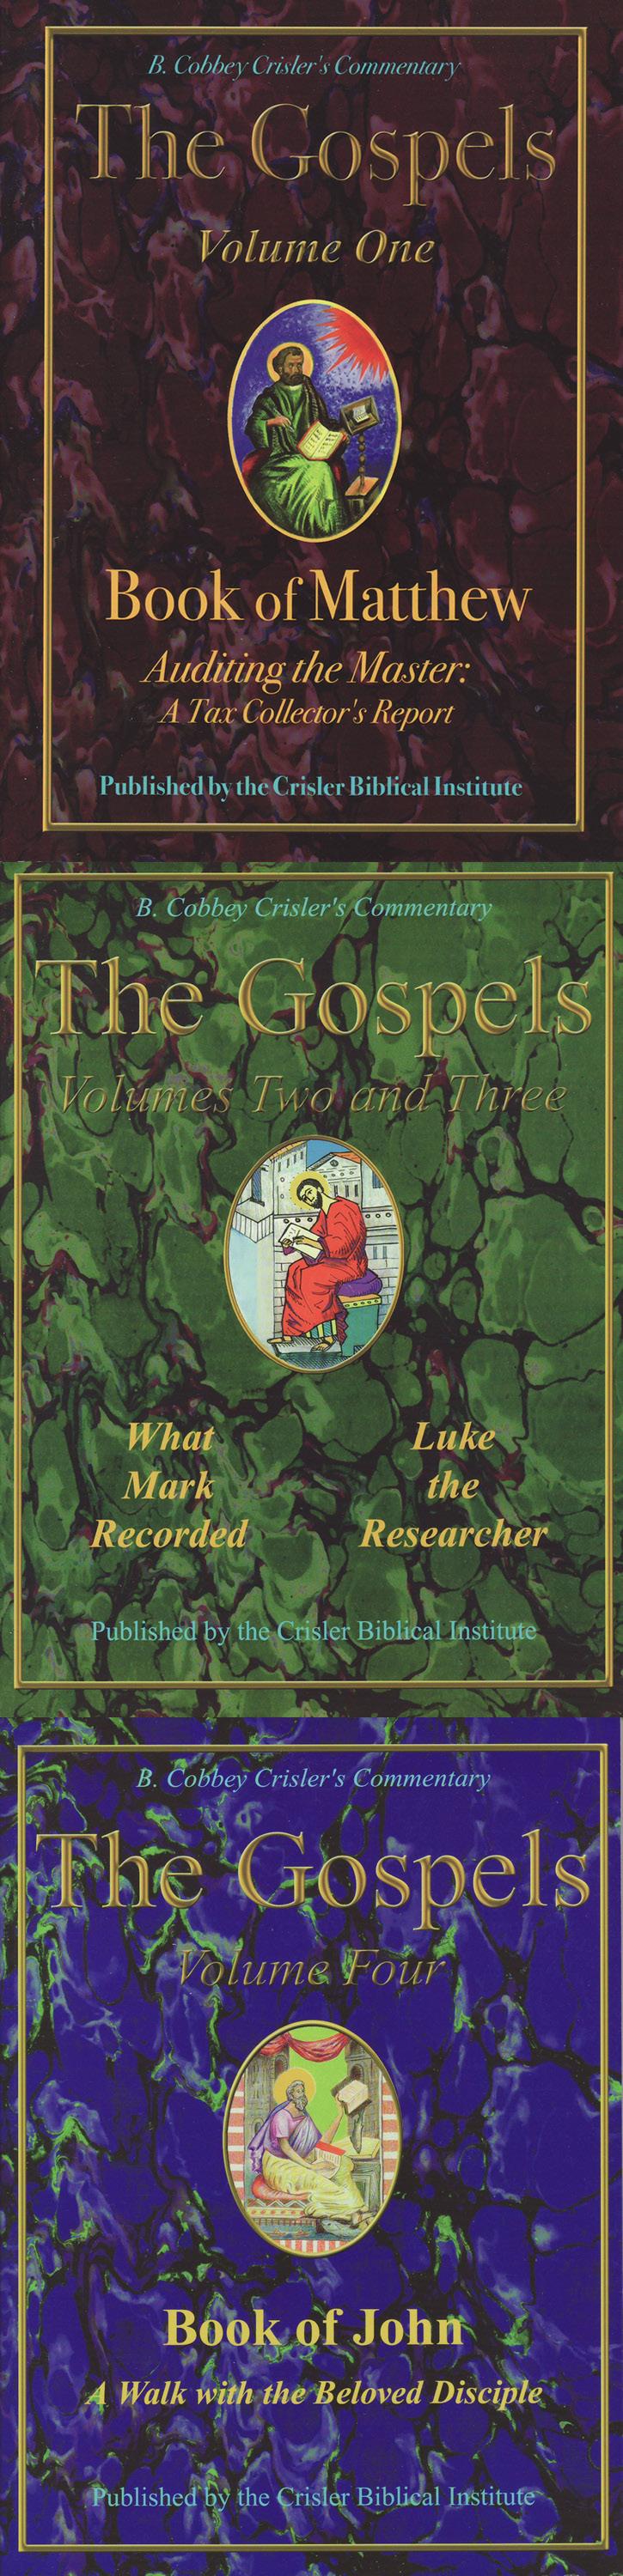 The Gospels Four Volumes by B.